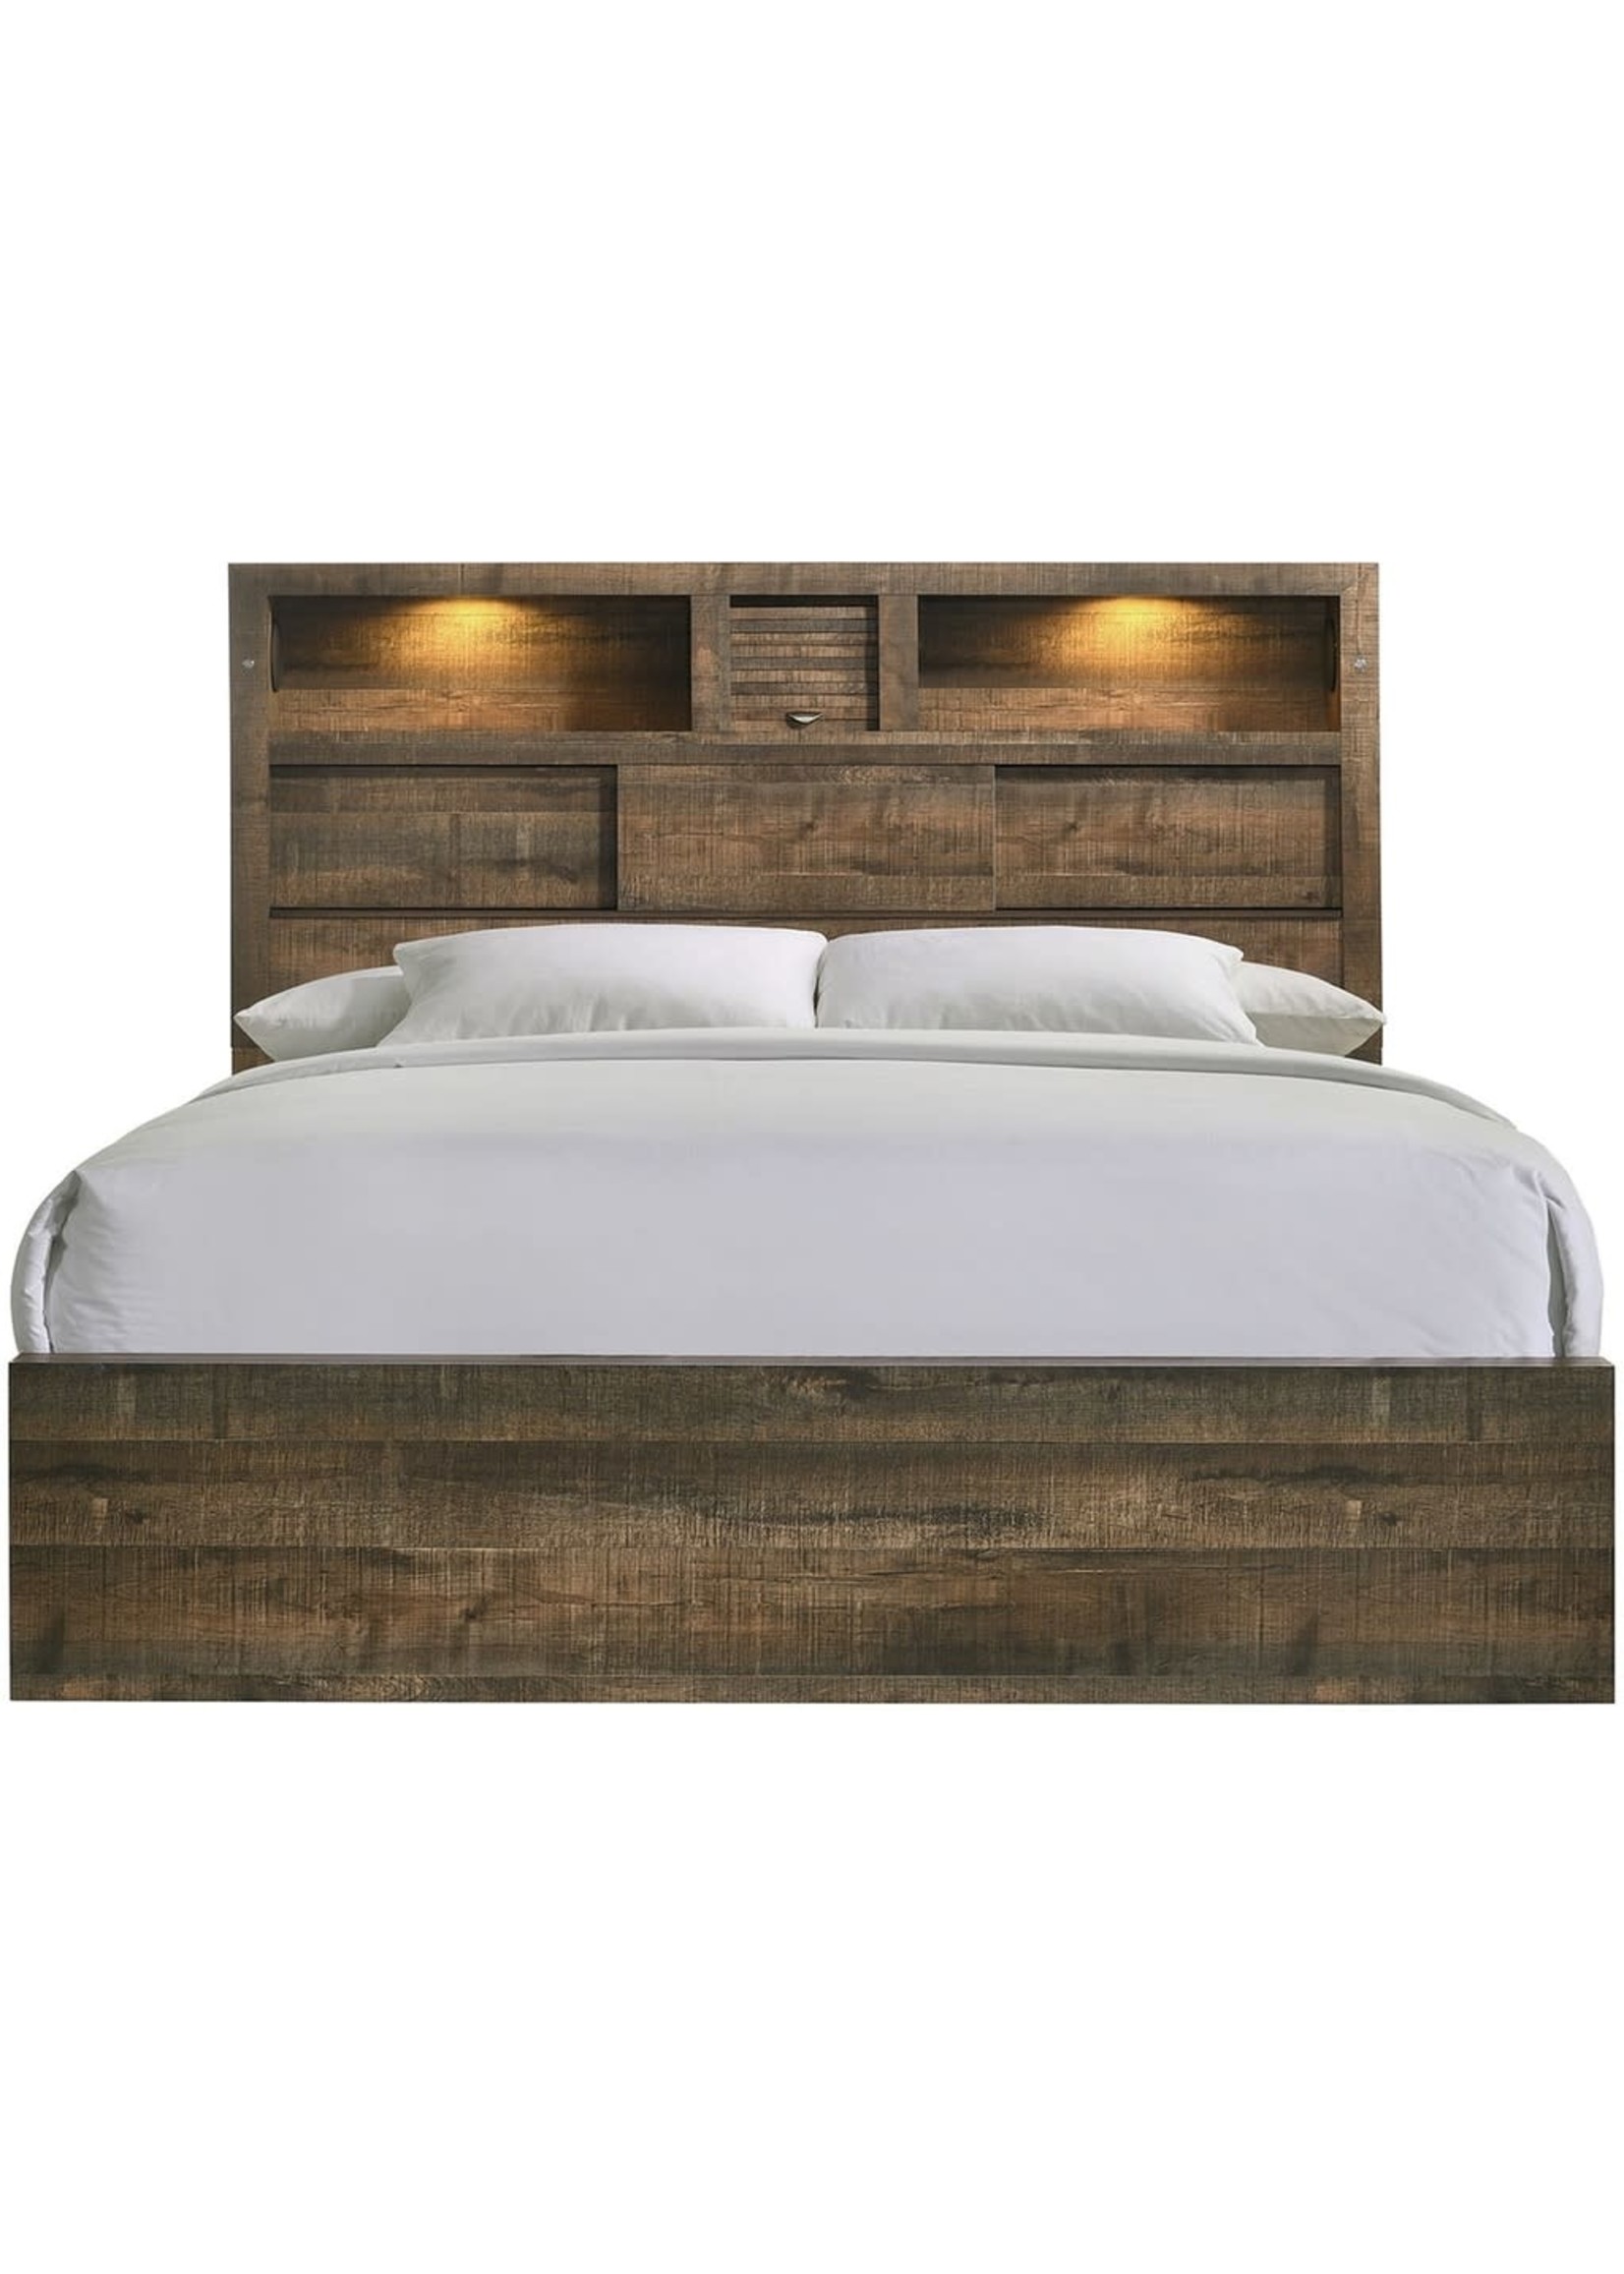 ELEMENTS KING BED BAILEY DRIFT FINISH STORAGE HEADBOARD WITH LIGHTS & SPEAKERS